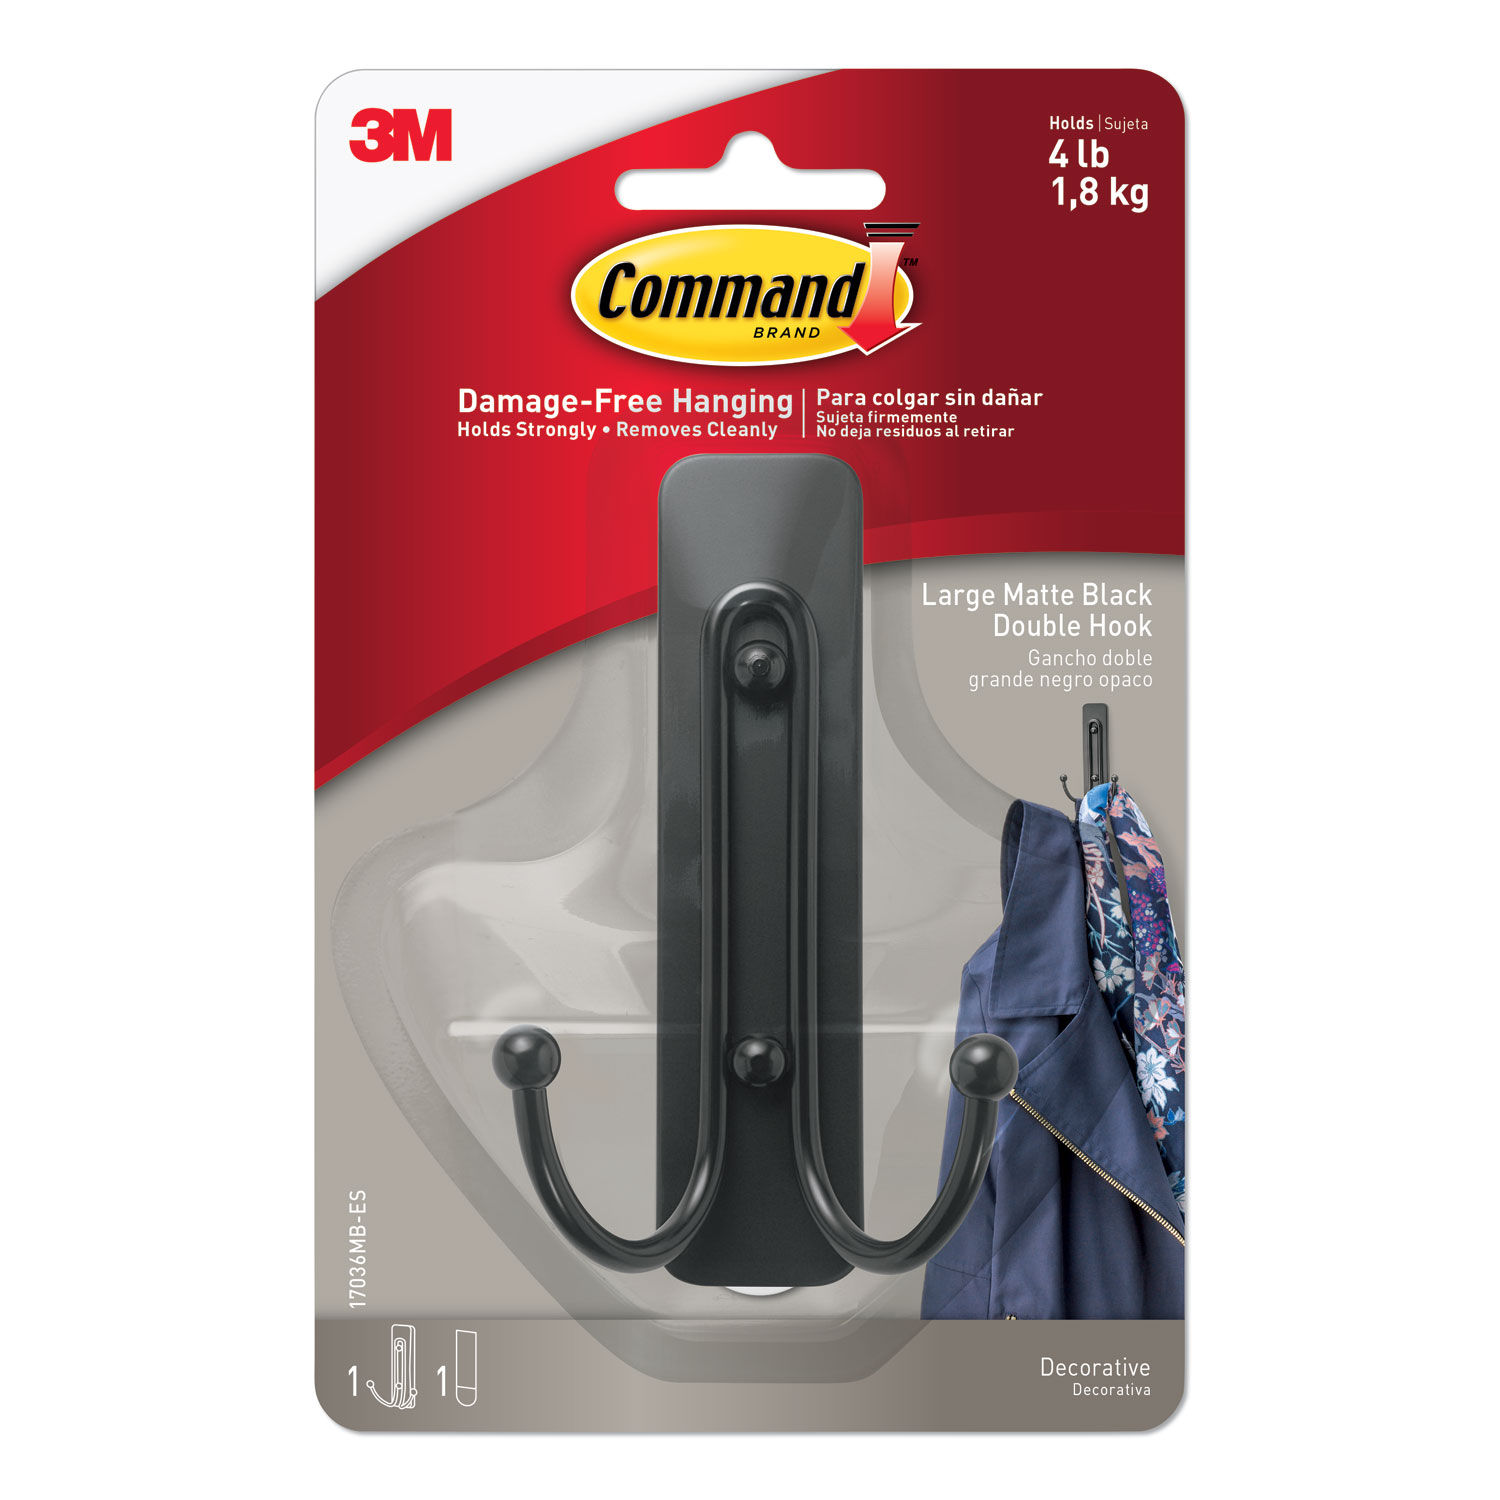  Command 17036MBES Adhesive Mount Metal Hook, Large, Double Hook, Matte Black Finish, 1 Hook and 1 Strip/Pack (MMM17036MBES) 